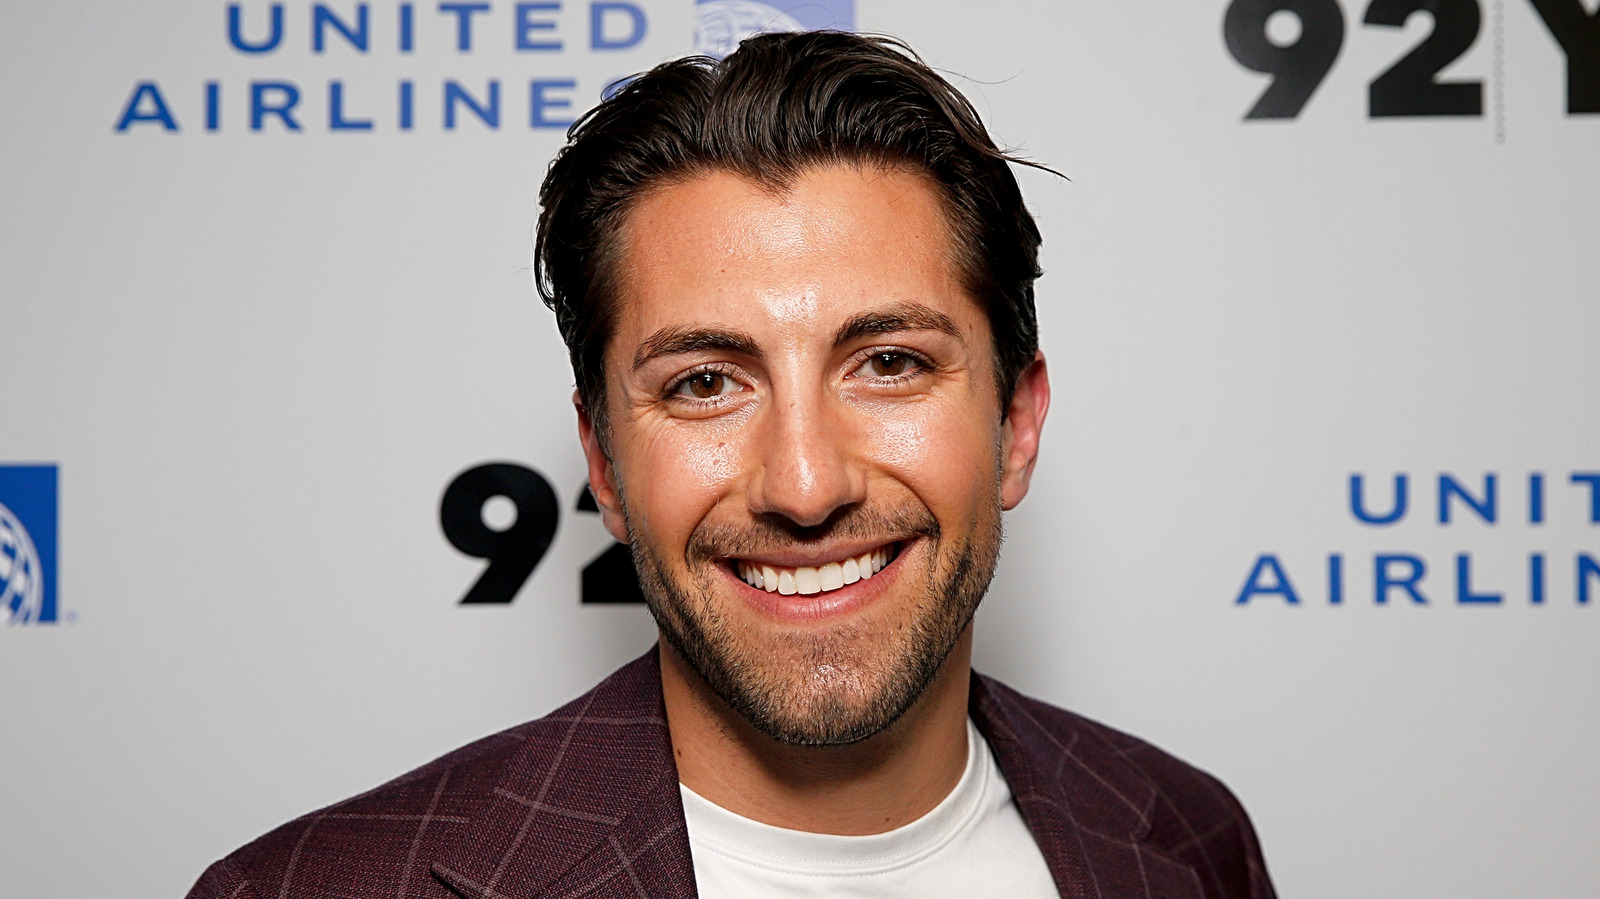 Jason Tartick On How The Bachelor Upgraded His Career & Love Life – Exclusive Interview